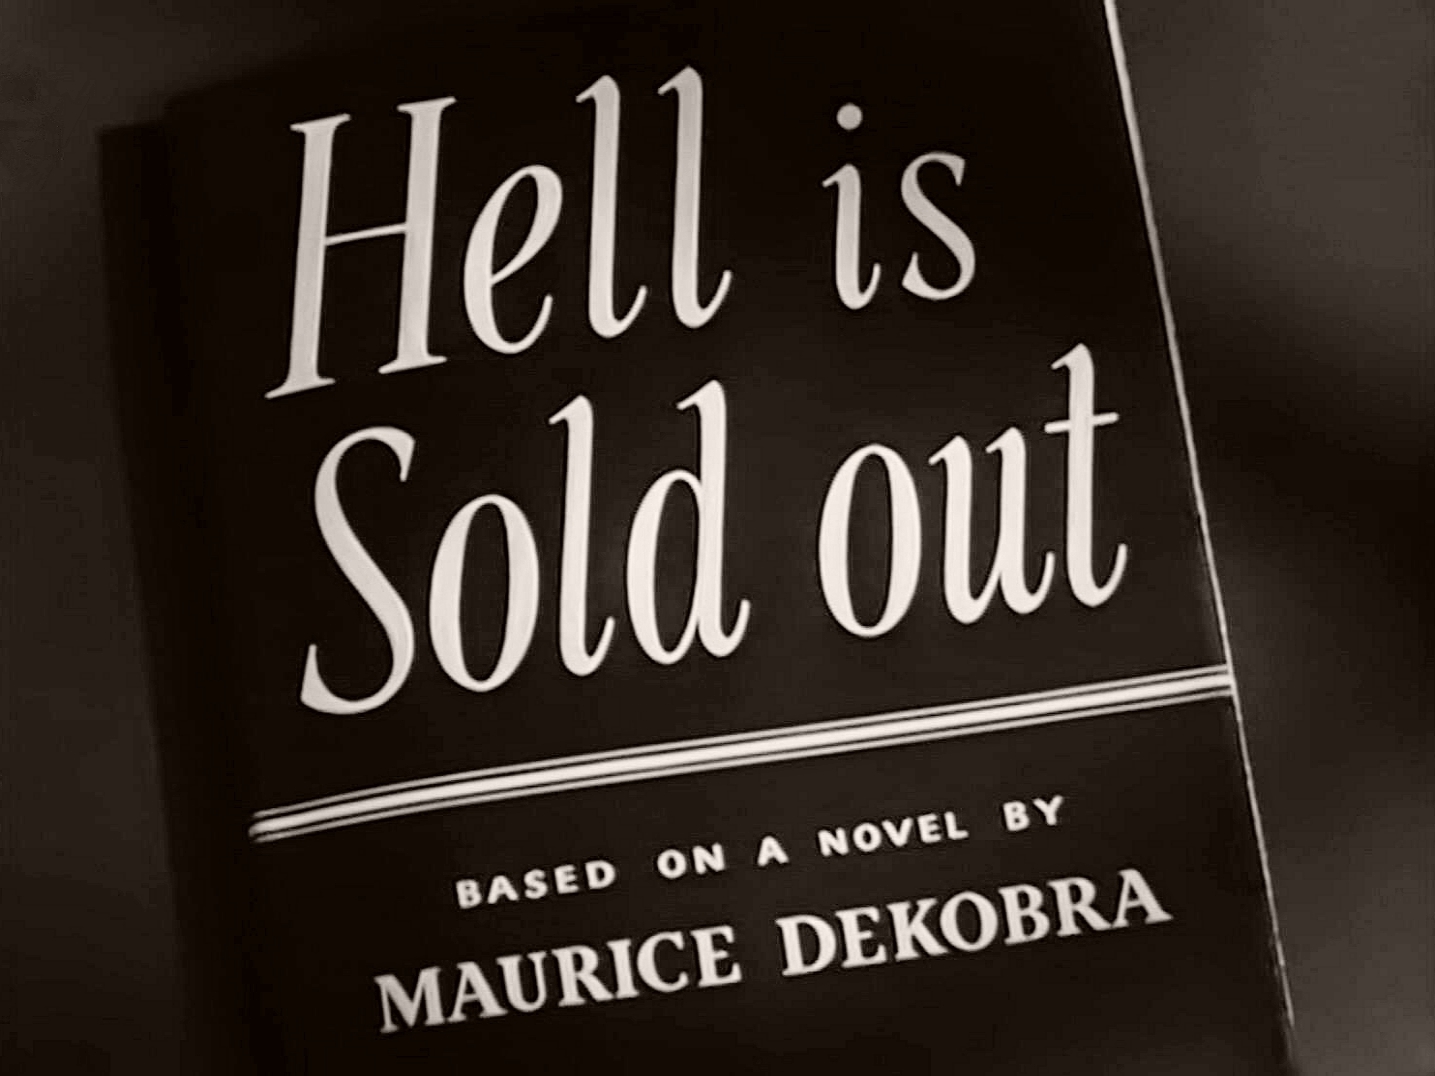 Main title from Hell Is Sold Out (1951) (2). Based on a novel by Maurice Dekobra